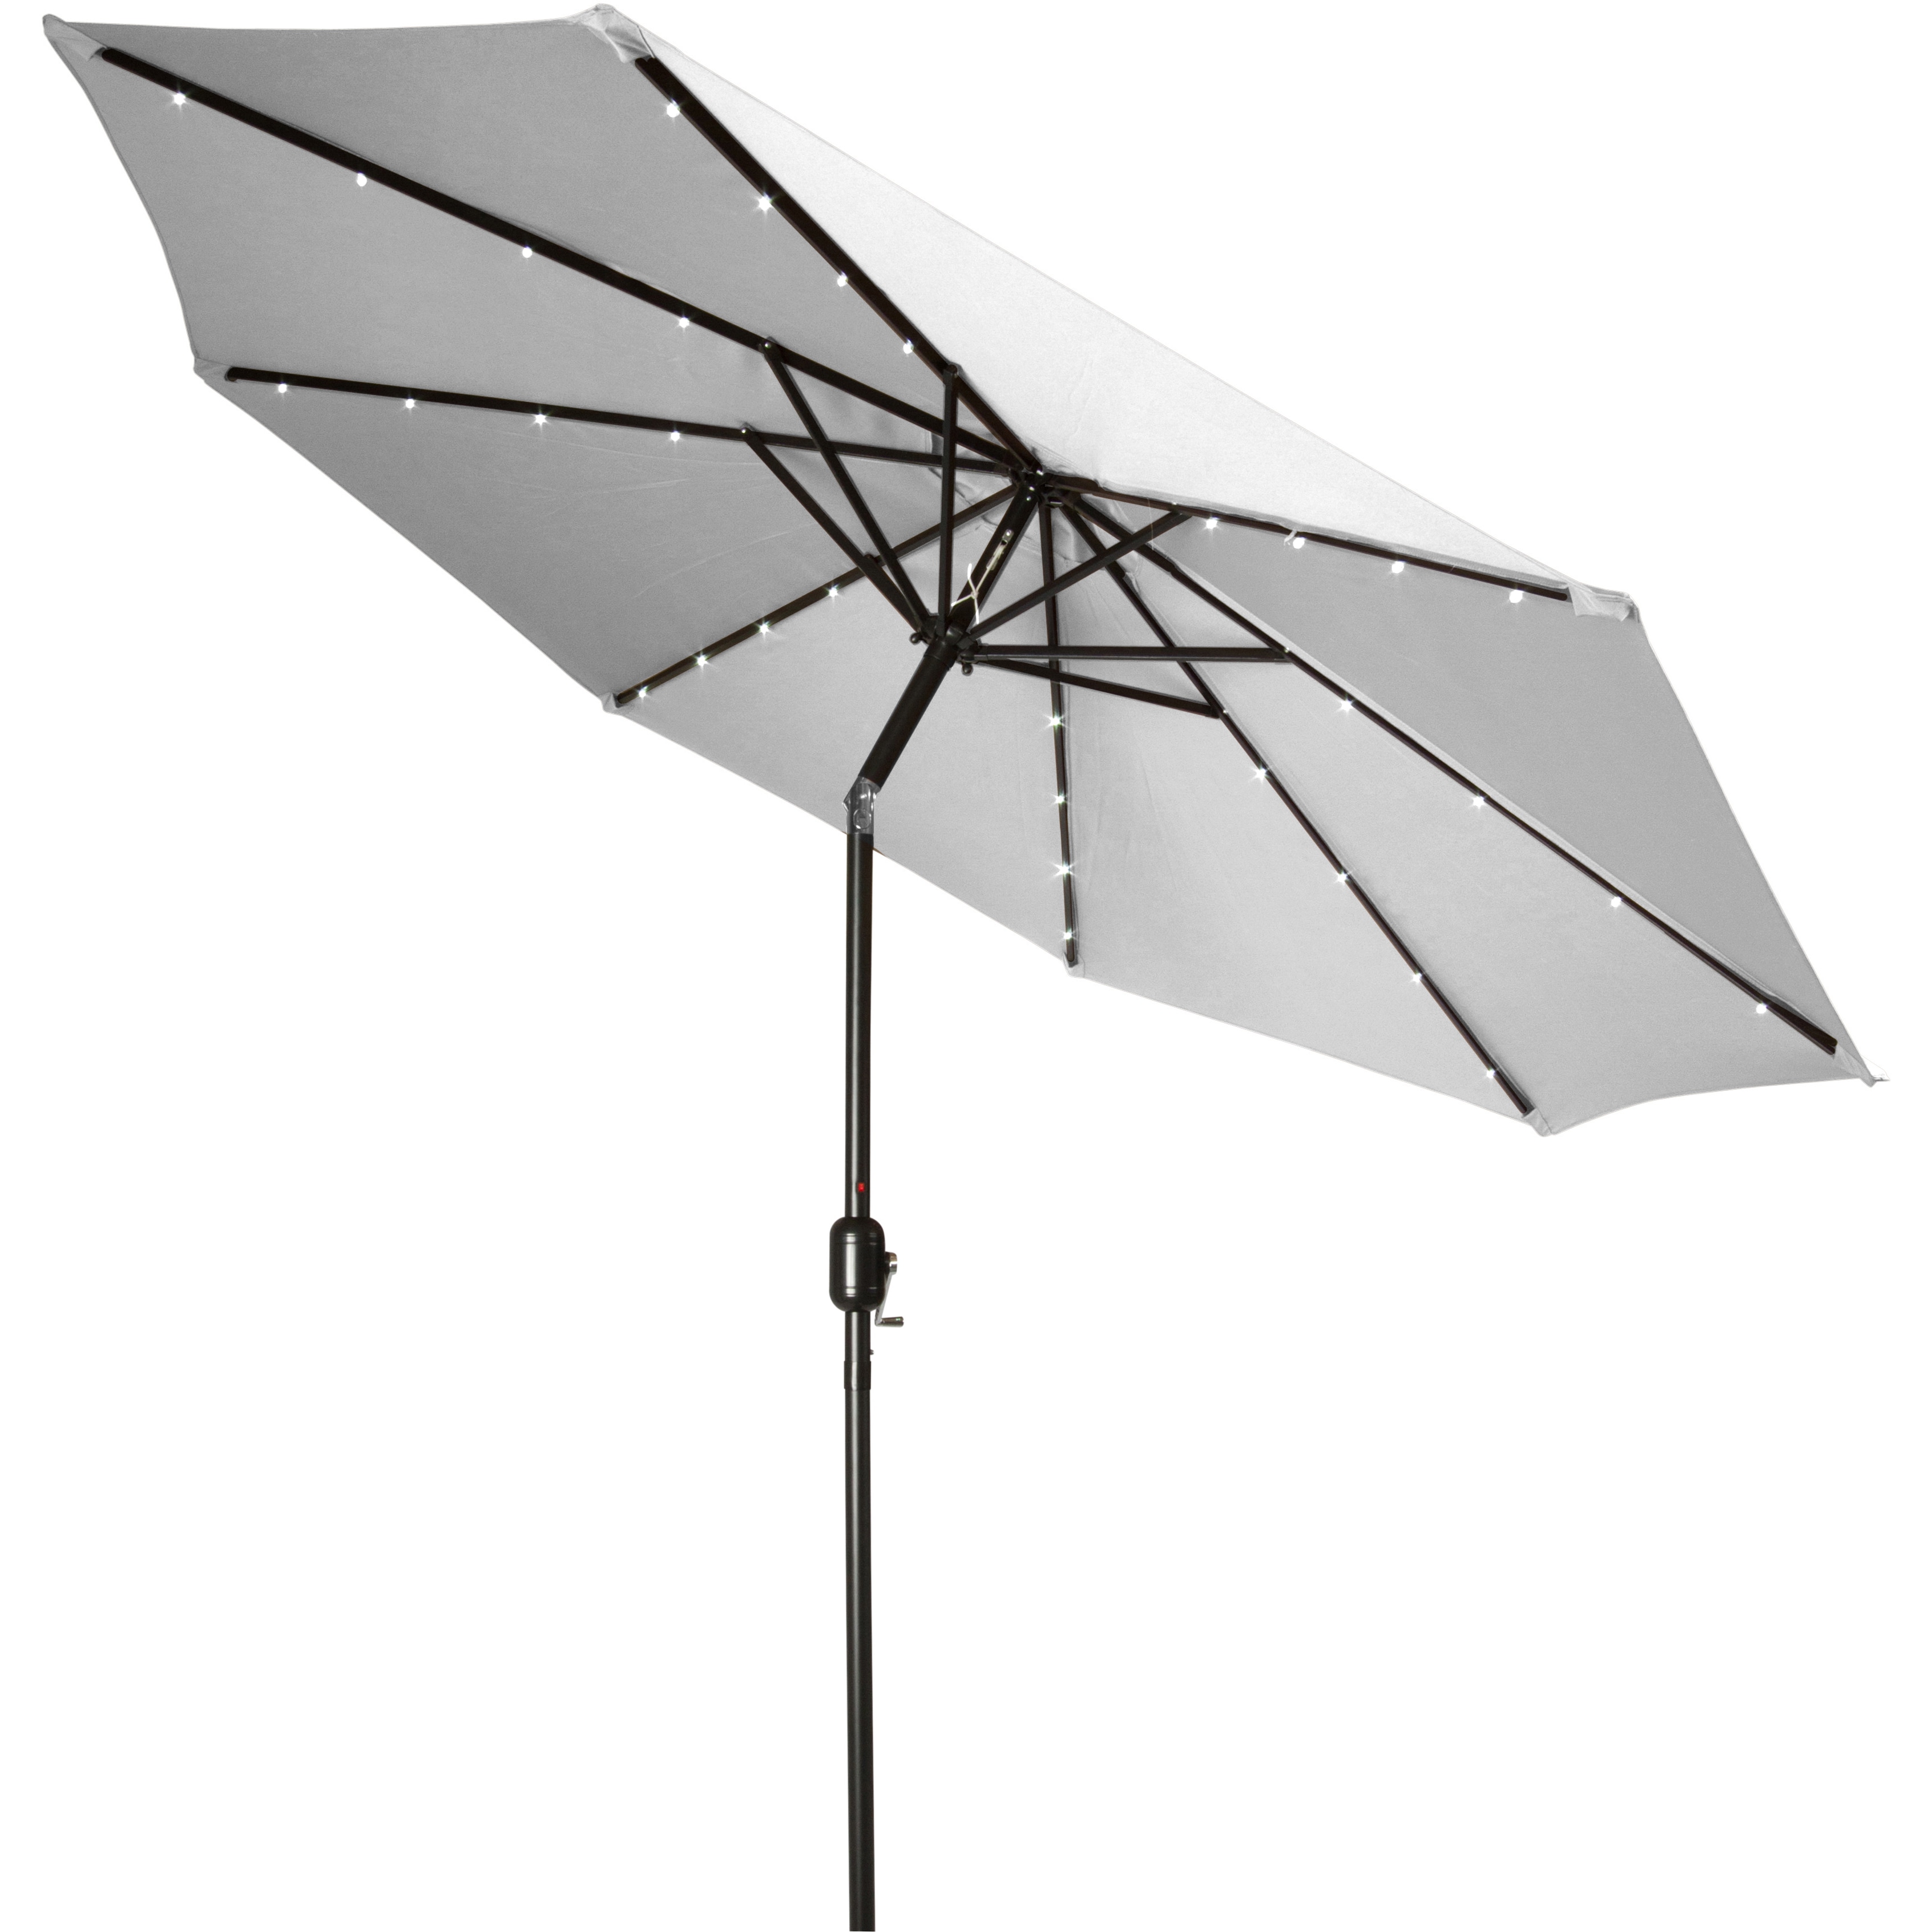 https://ak1.ostkcdn.com/images/products/13817771/Deluxe-Solar-Powered-LED-Lighted-Patio-Umbrella-9-By-Trademark-Innovations-Gray-82af3354-30c5-41a9-998b-62cd2fd96396.jpg